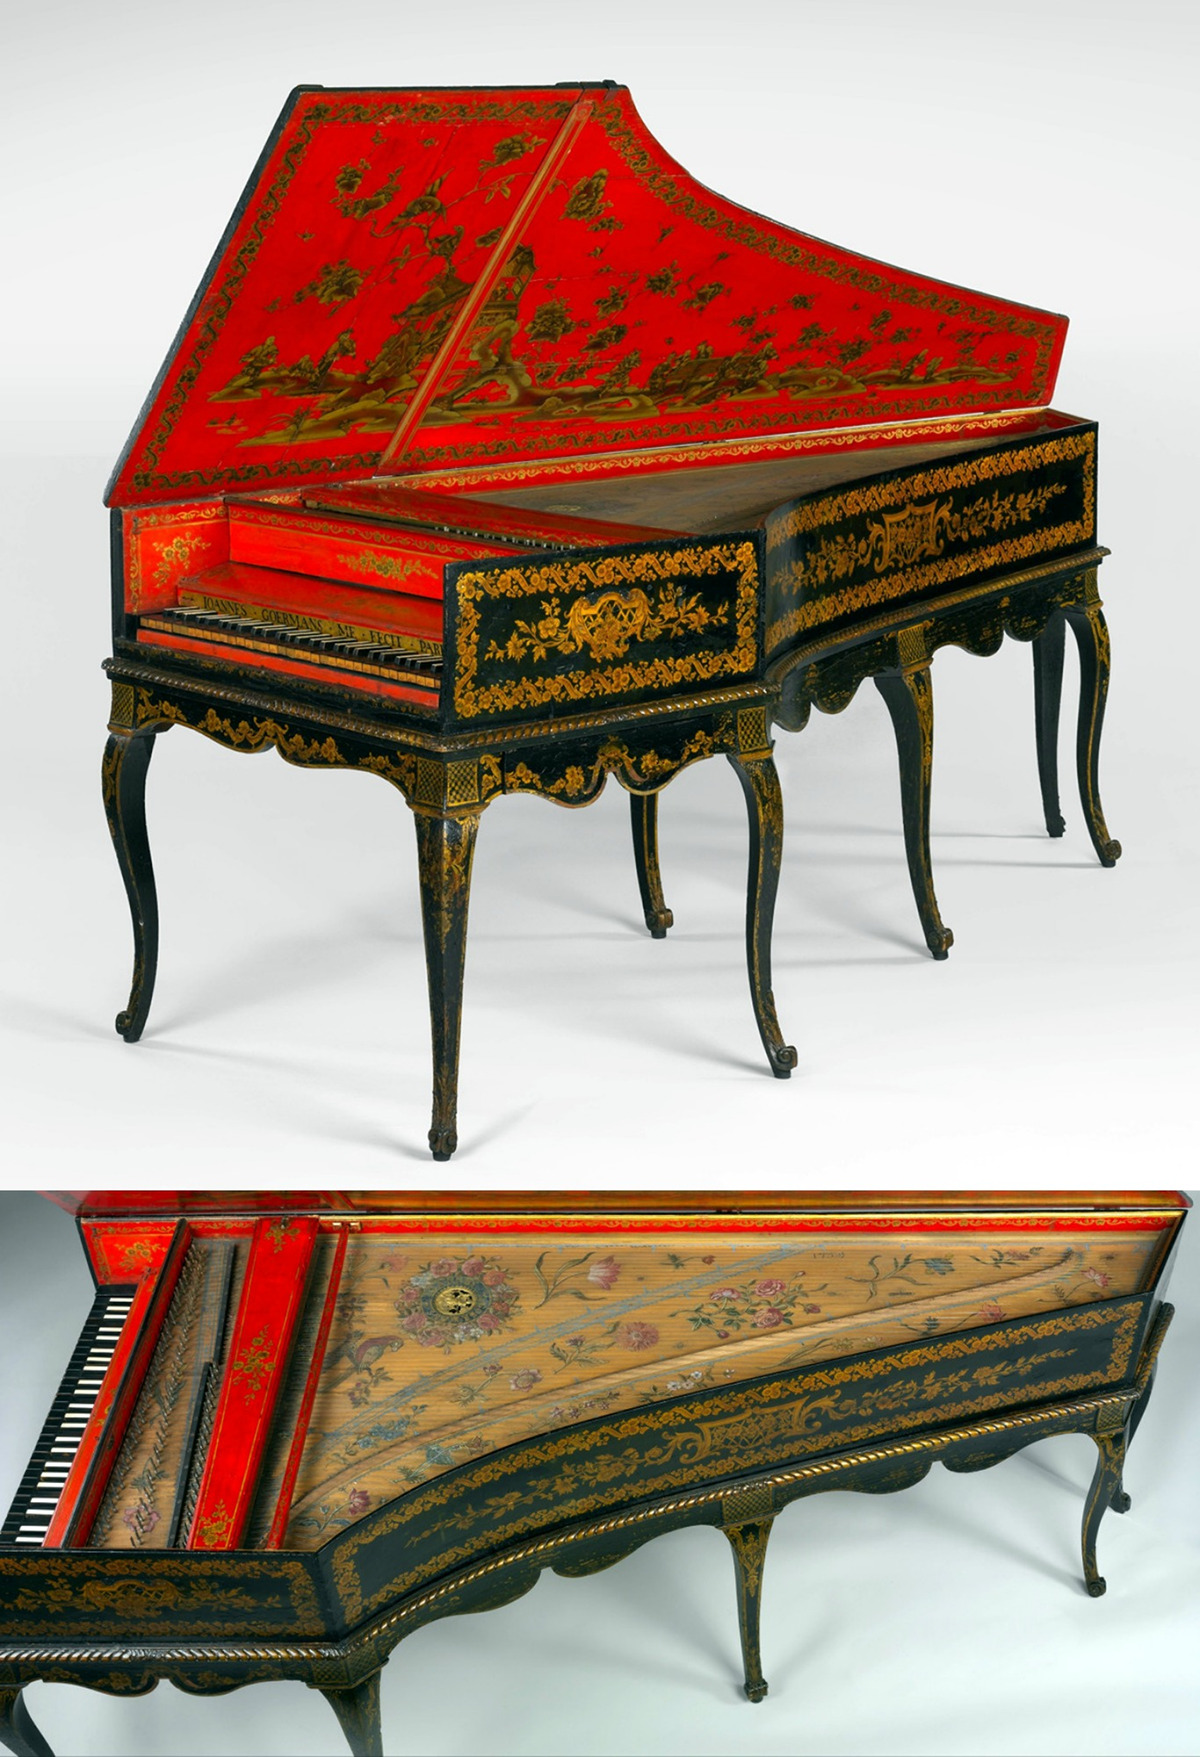 1754 Harpsichord converted to a piano. French. Wood, paint, gilding, polychrome, gilded pewter, ebony, bone, felt. metmuseum